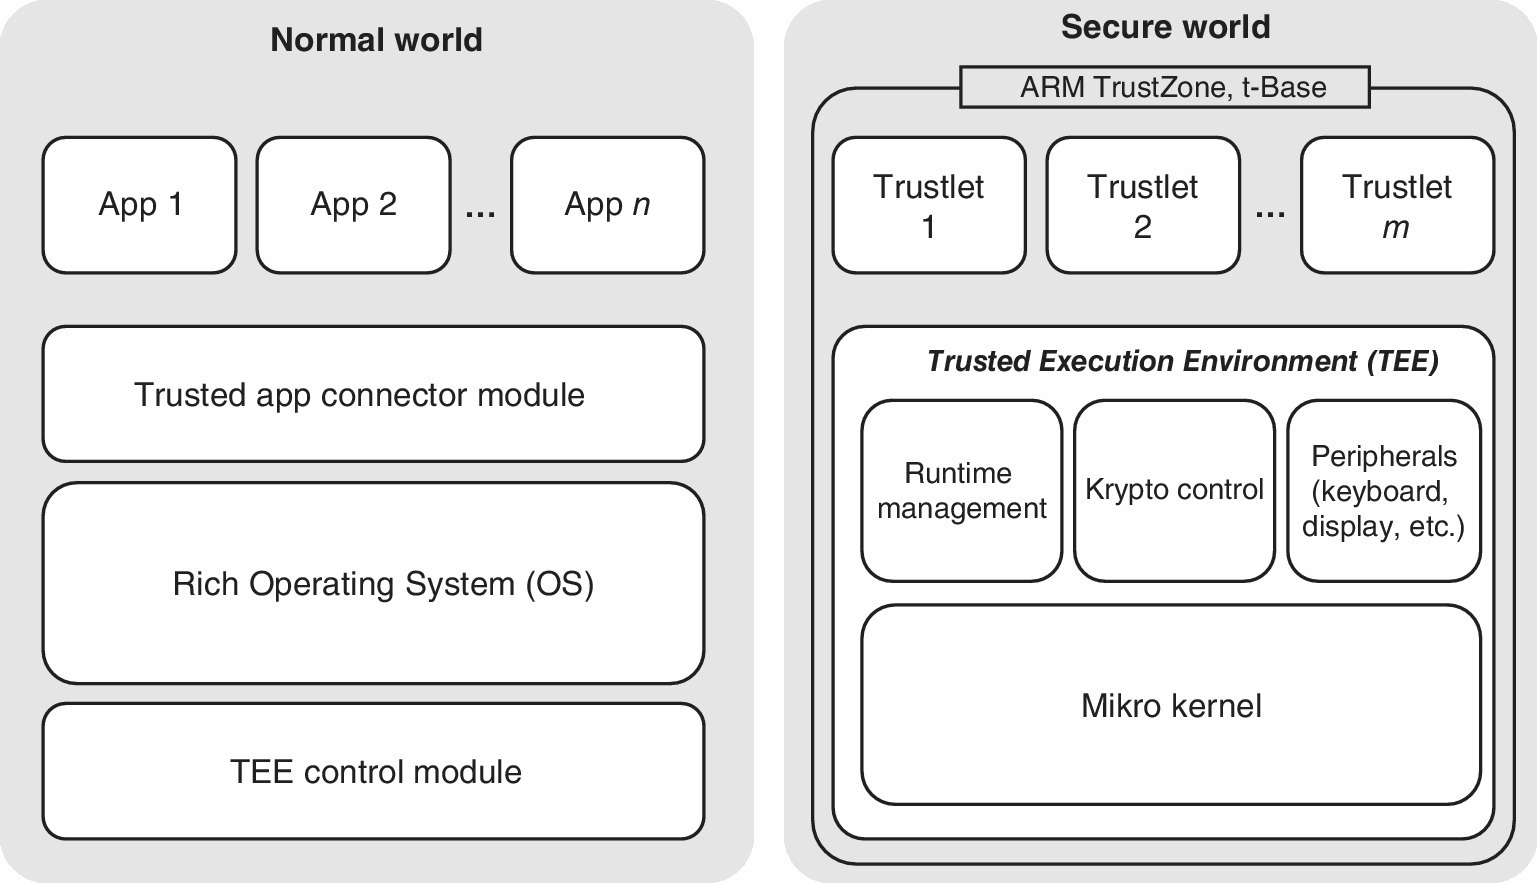 Block diagrams of the TEE architecture based on ARM TrustZone t‐Base depicting normal world (left) and secure world (right).